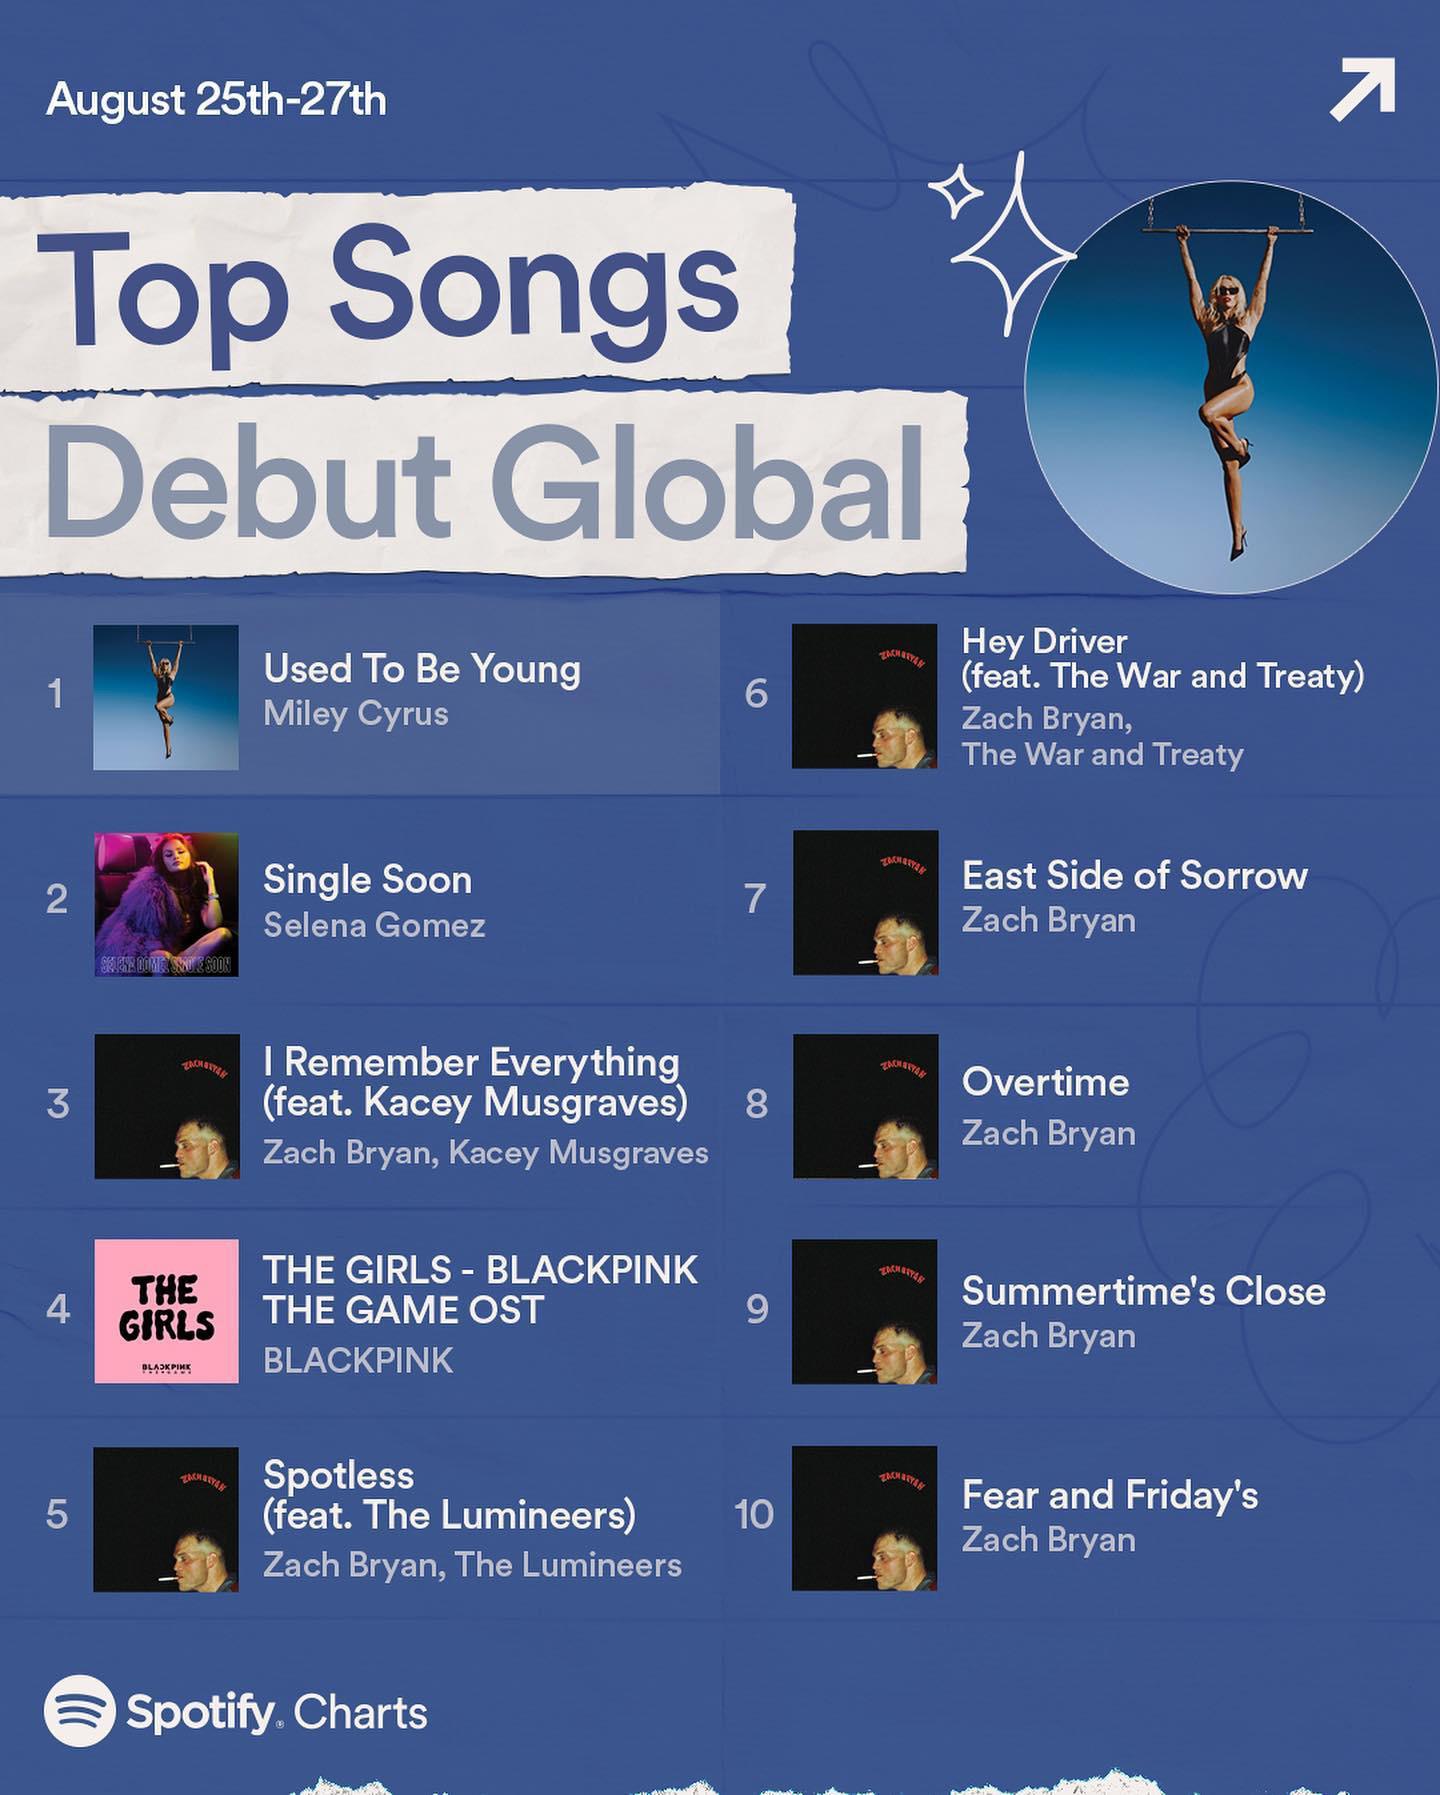 230829 BLACKPINK - ‘THE GIRLS’ charted at #4 on Spotify’s Top Songs Debut Global